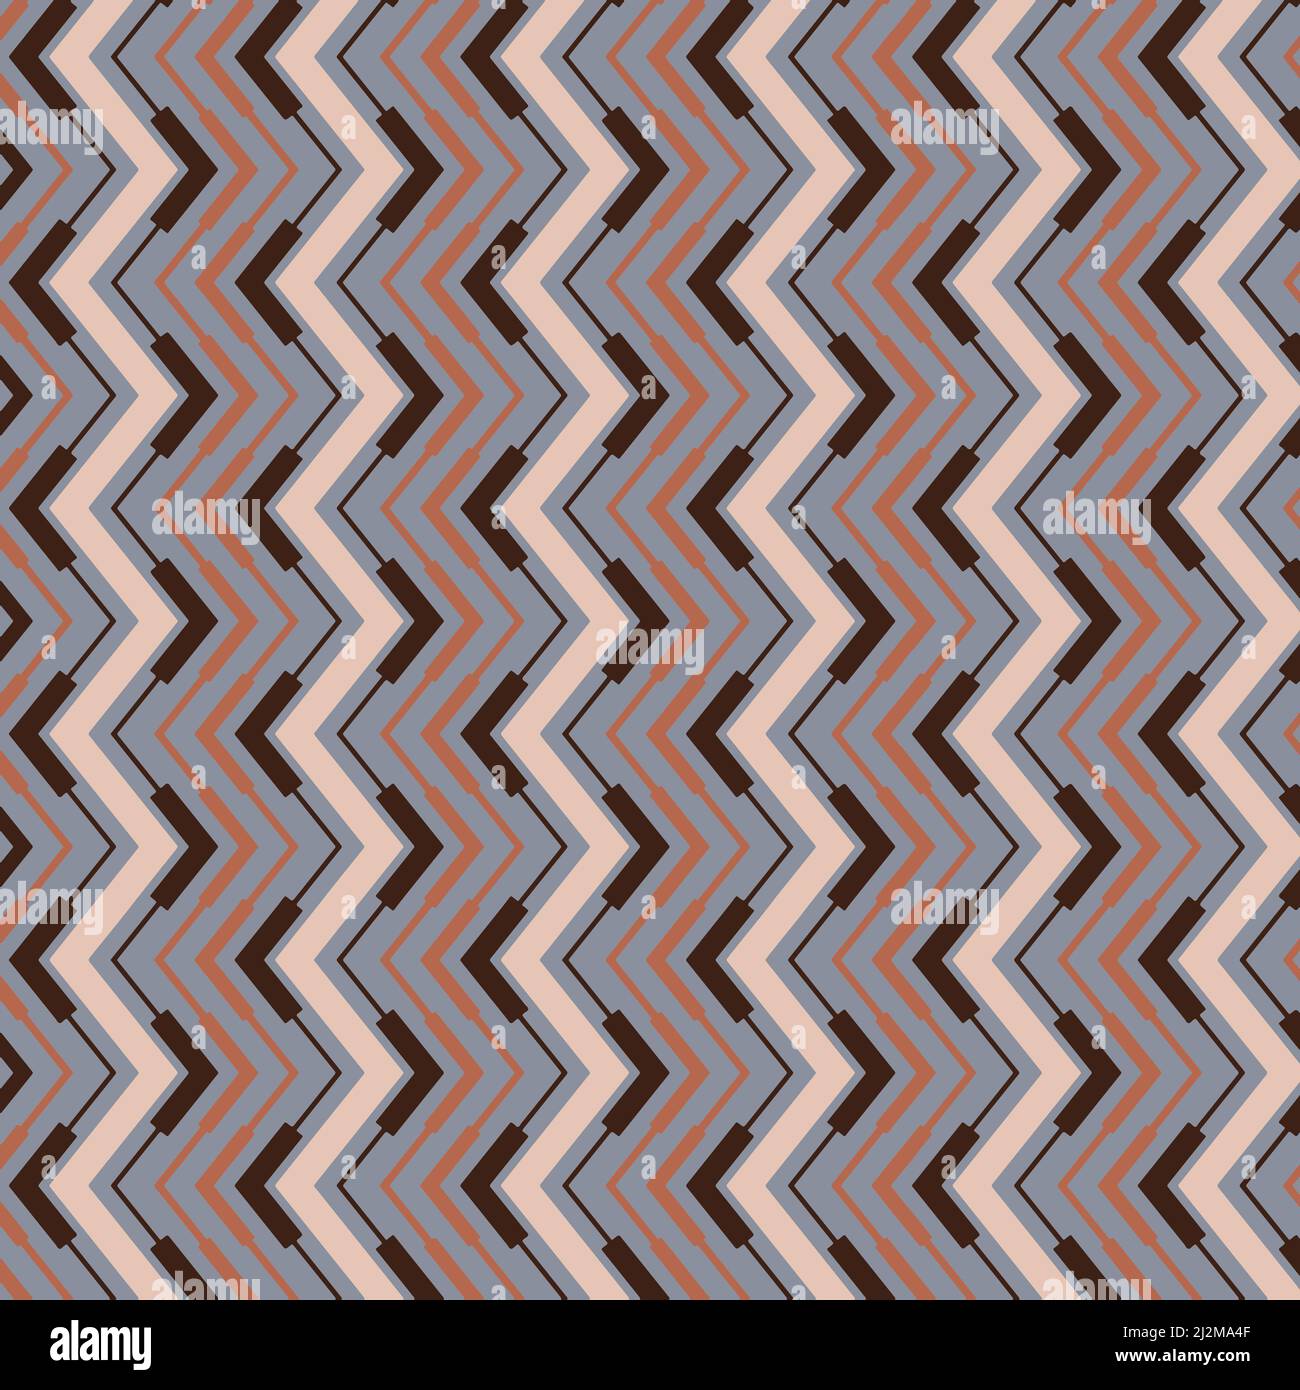 Country western chevron pattern background in different vertical zigzags in gray, peach coral, brown and copper red colors for this design element. Stock Photo